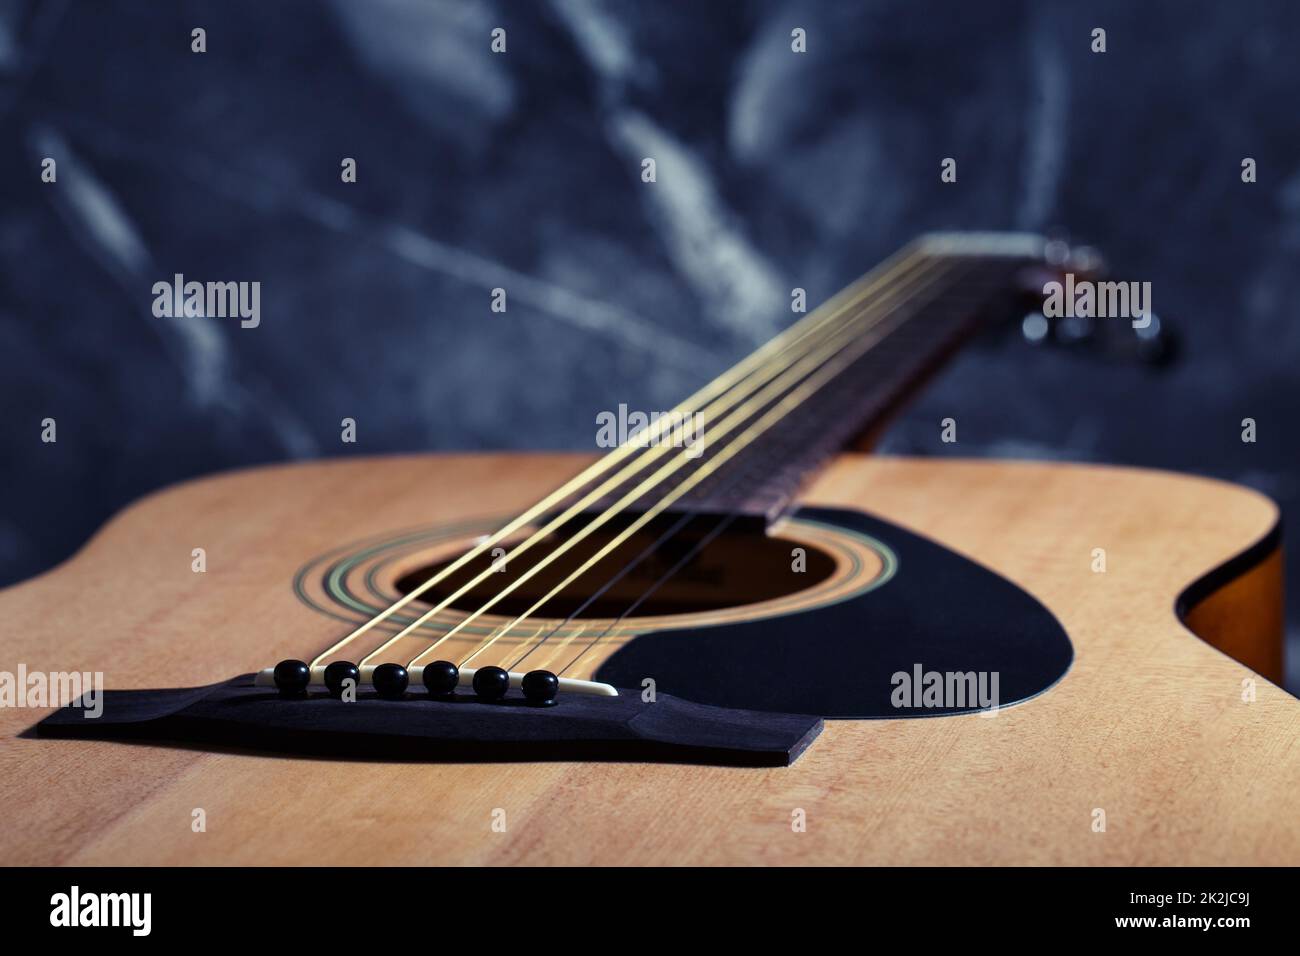 Six stringed acoustic guitar Stock Photo